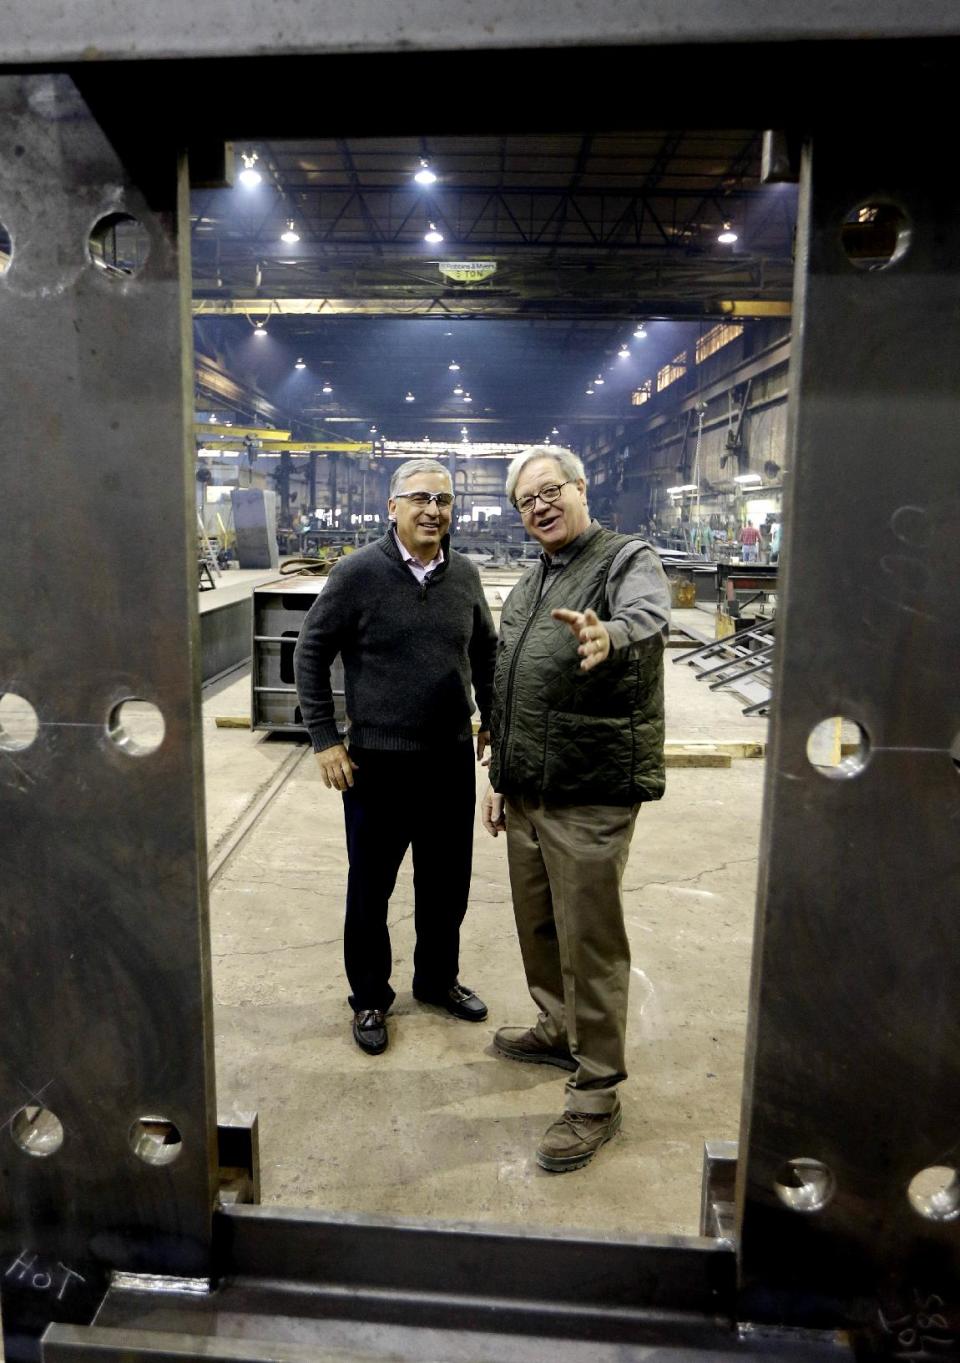 Cedar Fair CEO Matt Ouimet, left, tours the Clermont Steel Fabricating plant with plant representative Bob Mampe, Wednesday, Jan. 9, 2013, in Batavia, Ohio. Ouimet is encouraged about the company's future and the industry and believes one key is keeping people happy. He said the company's new dramatic roller coaster under construction in southwest Ohio will help achieve that goal. (AP Photo/Al Behrman)